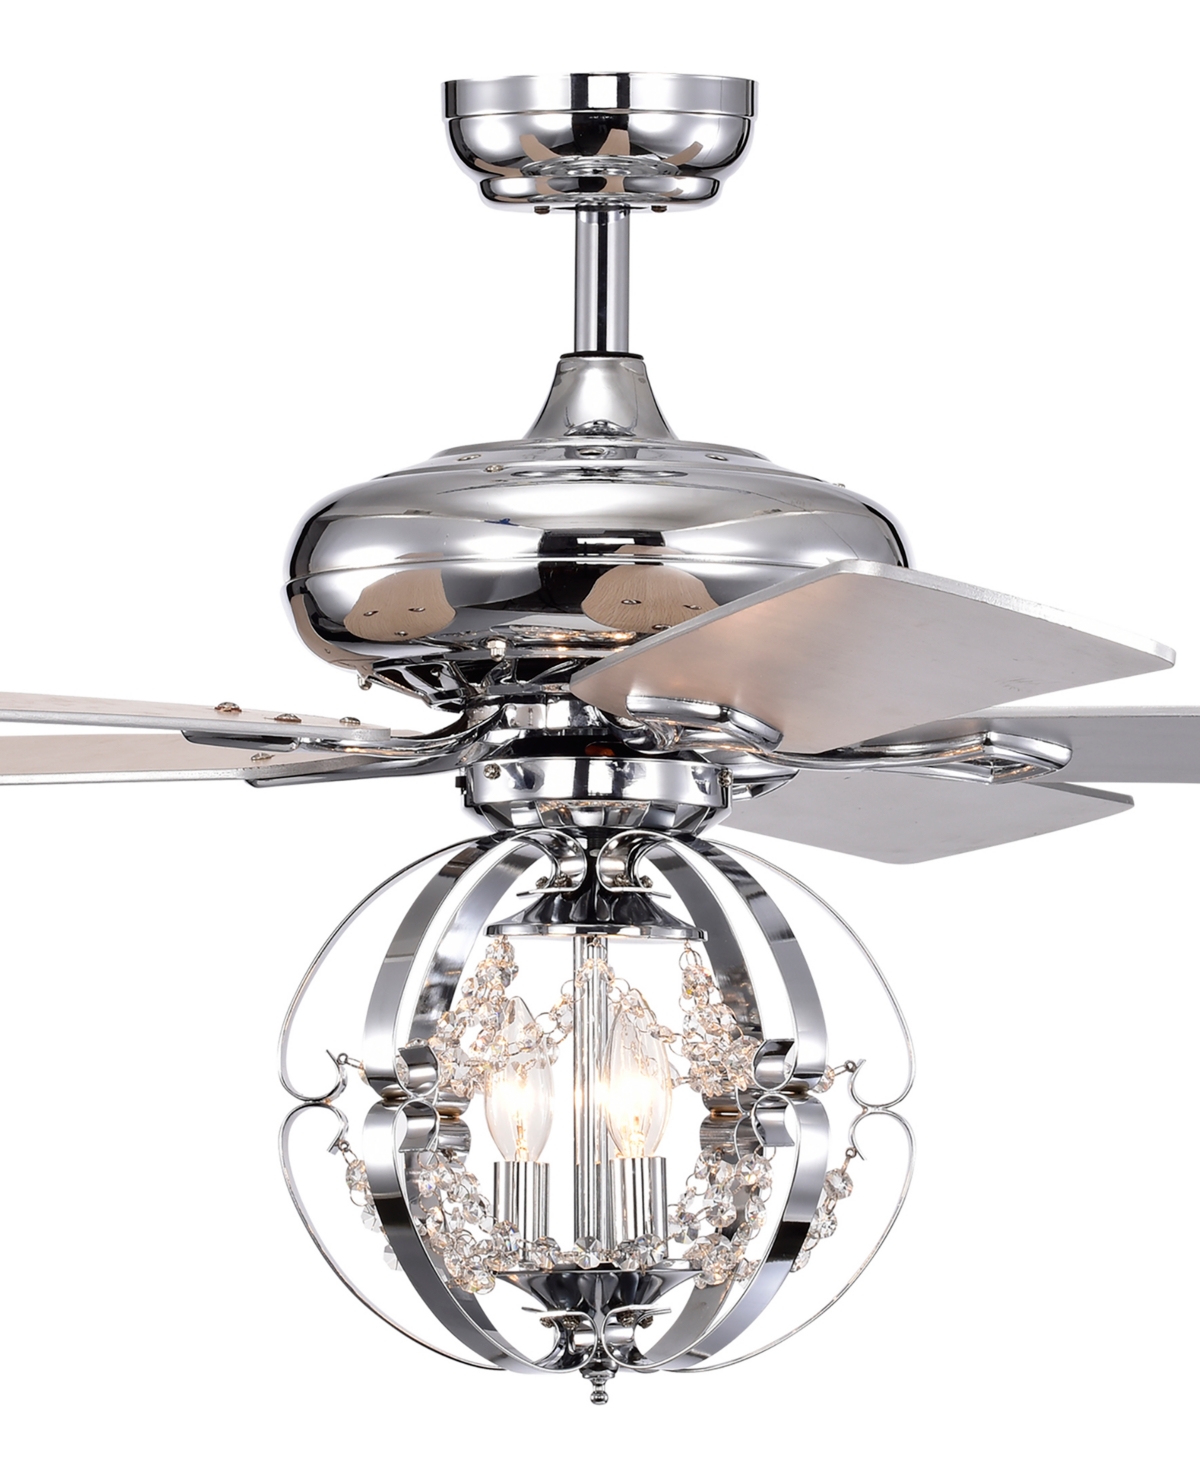 Home Accessories Dazy 48" 3-light Indoor Ceiling Fan With Light Kit In Chrome